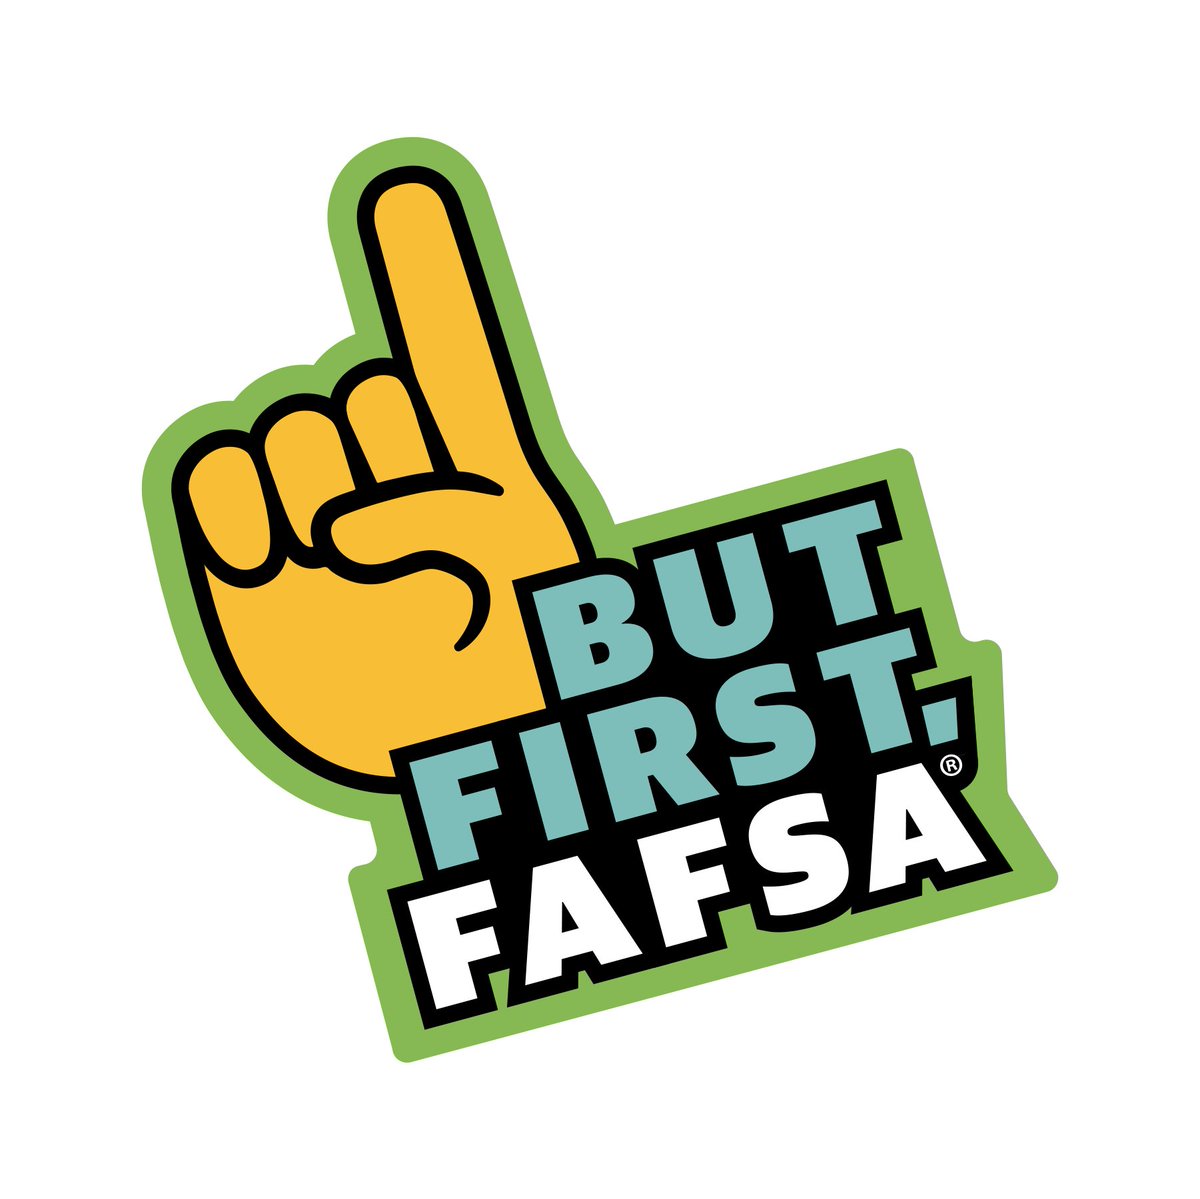 Have you FAFSA'd yet? There is help available for Arizona high school seniors to receive expert advice to complete their FAFSA application with confidence, including FAFSA Money Mondays on April 22nd and 29th. collegereadyaz.com/FAFSA for all the details! #gilbertpublicschools